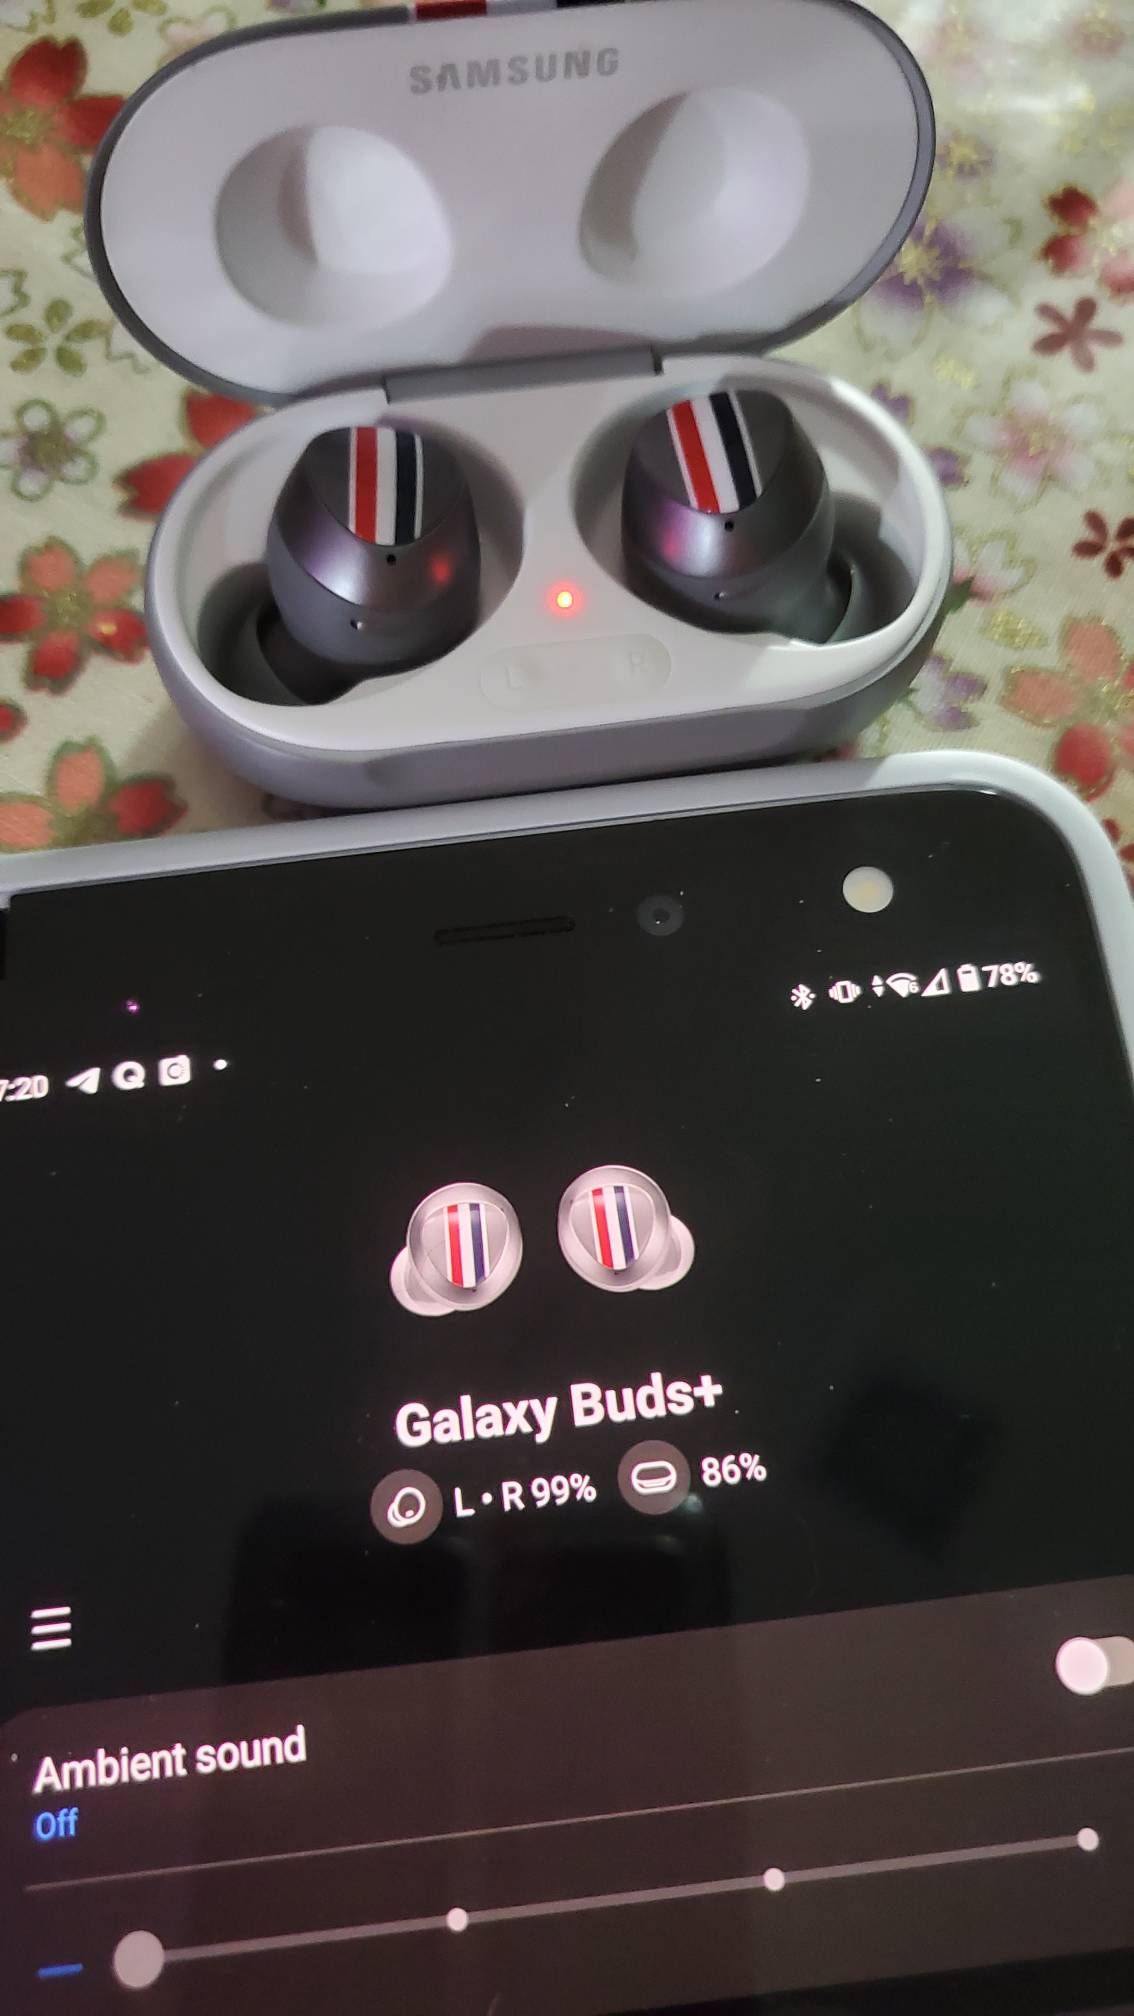 Buds Pro Case Battery Level Not Shown in Wearable ... - Samsung Members